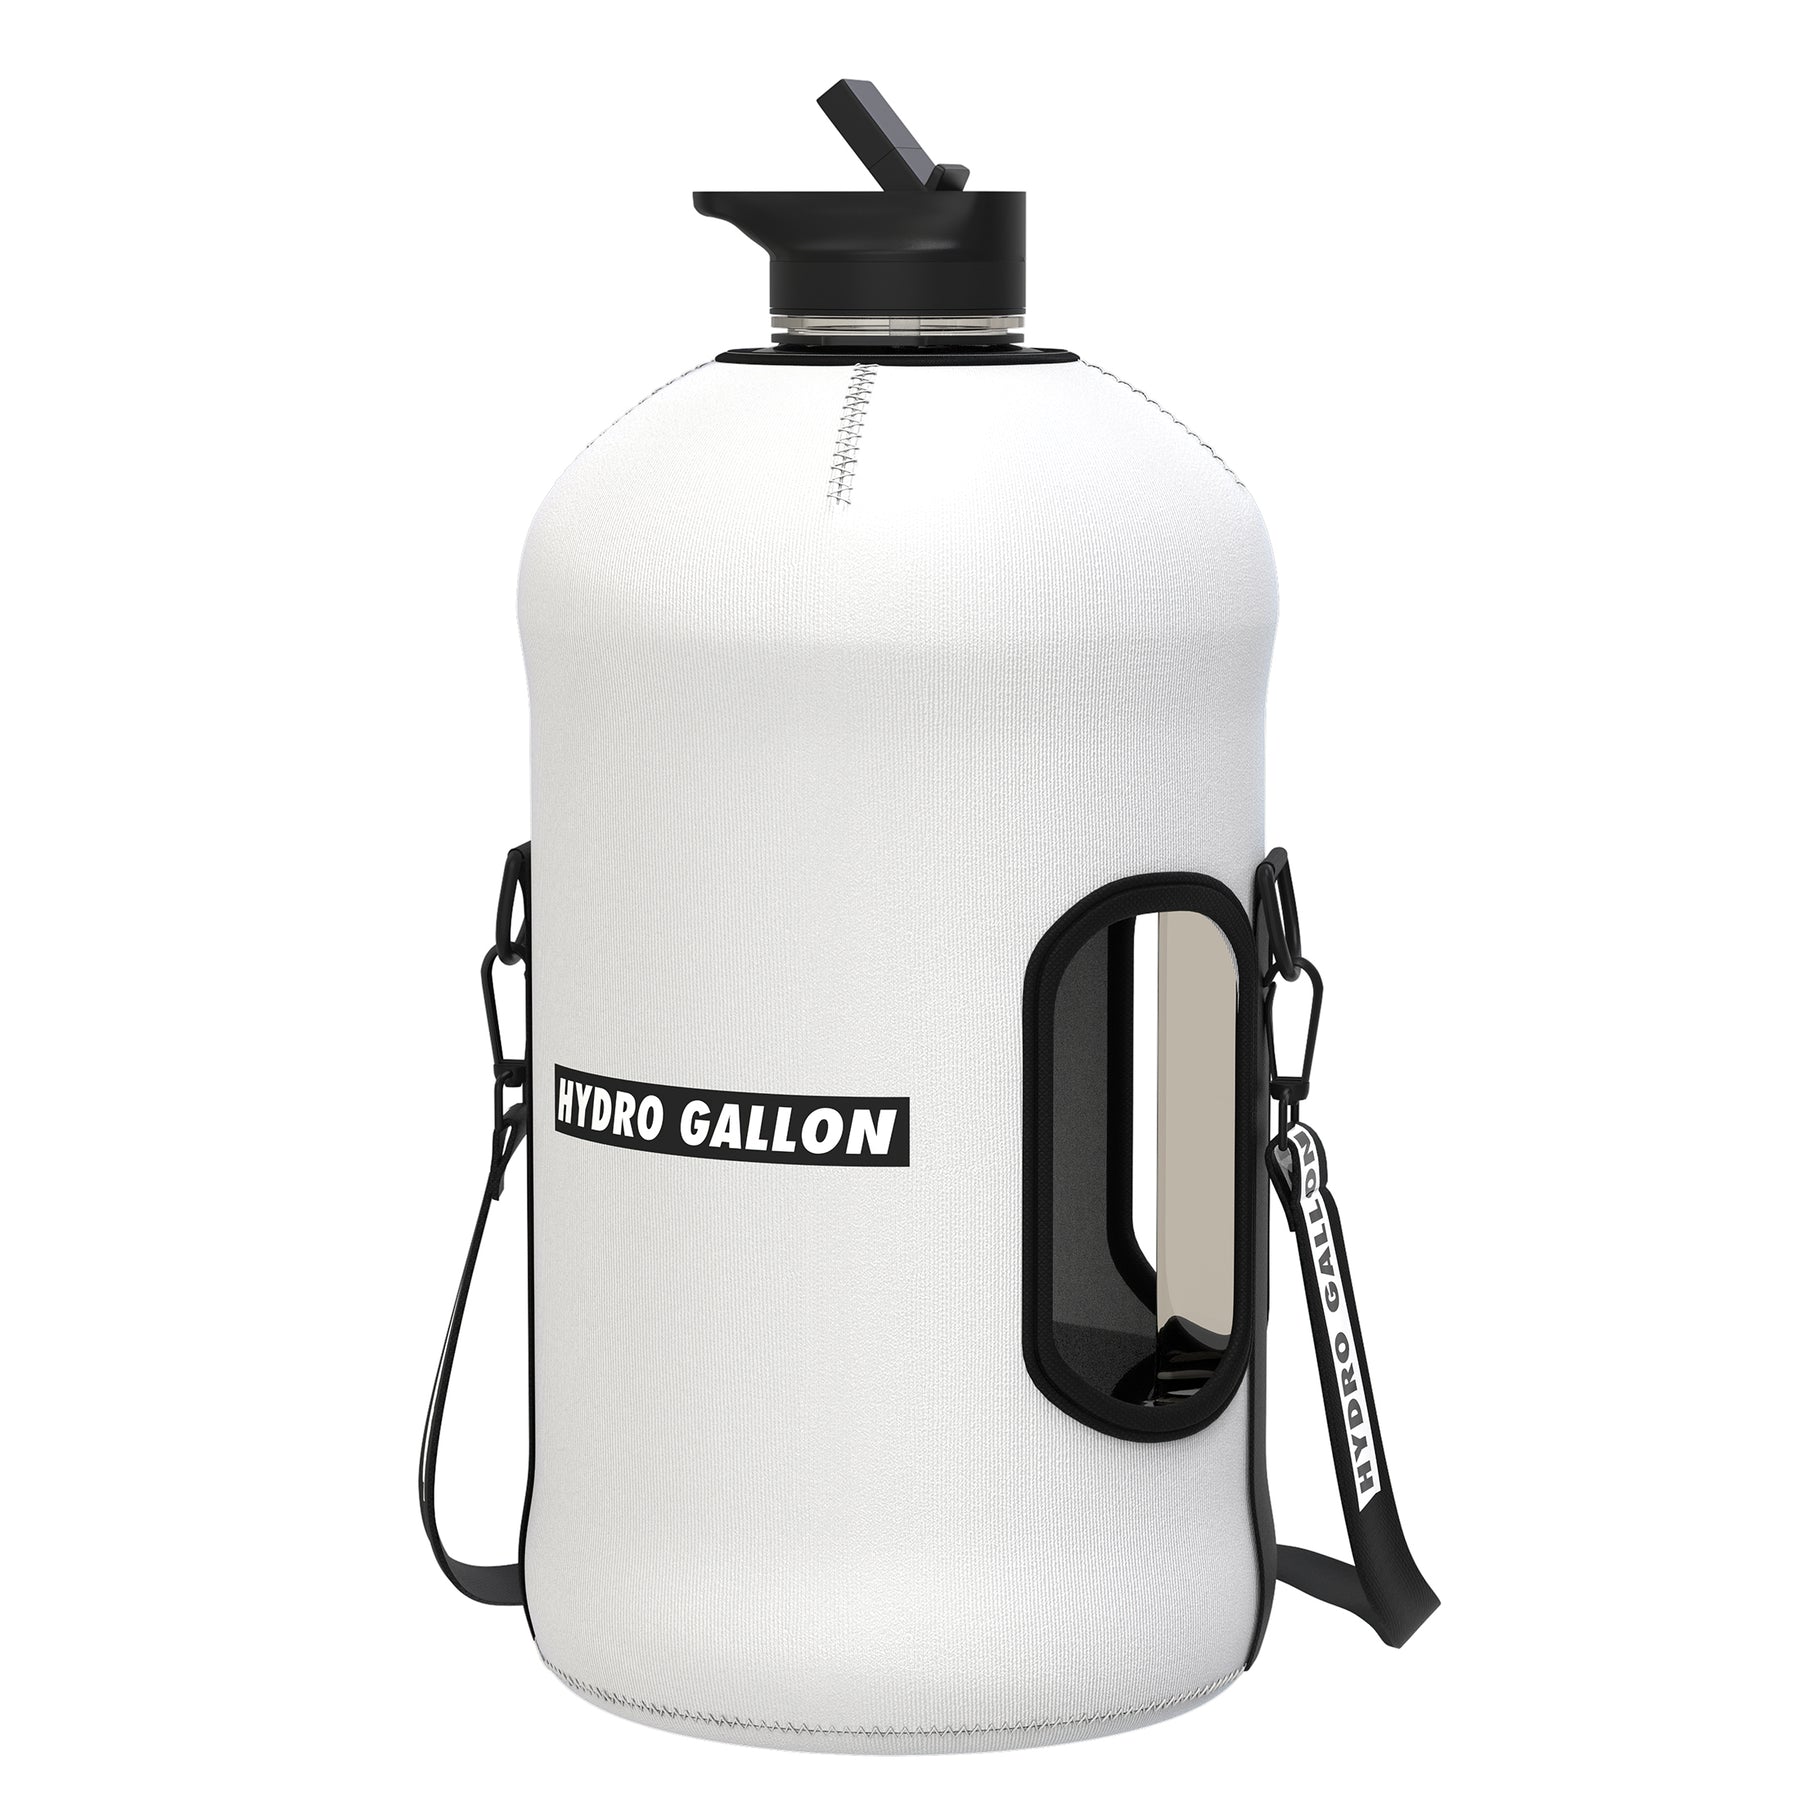 hydro gallon 1 one gallon water bottle straw lid jug with sleeve shoulder carrying strap pocket for phone keys motivational time markers 75 hard insulated neoprene bpa free leakproof side handle